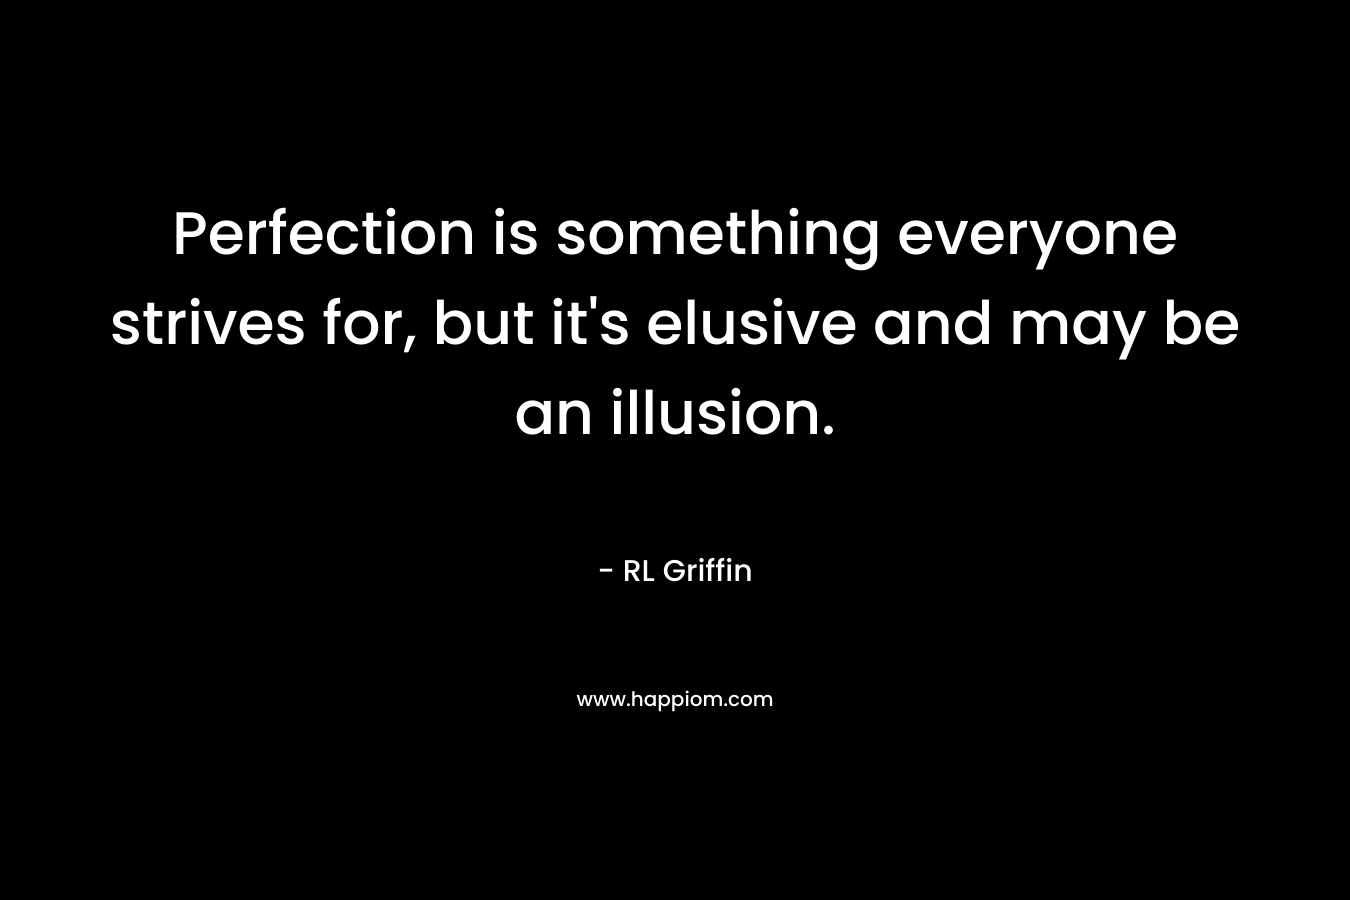 Perfection is something everyone strives for, but it's elusive and may be an illusion.